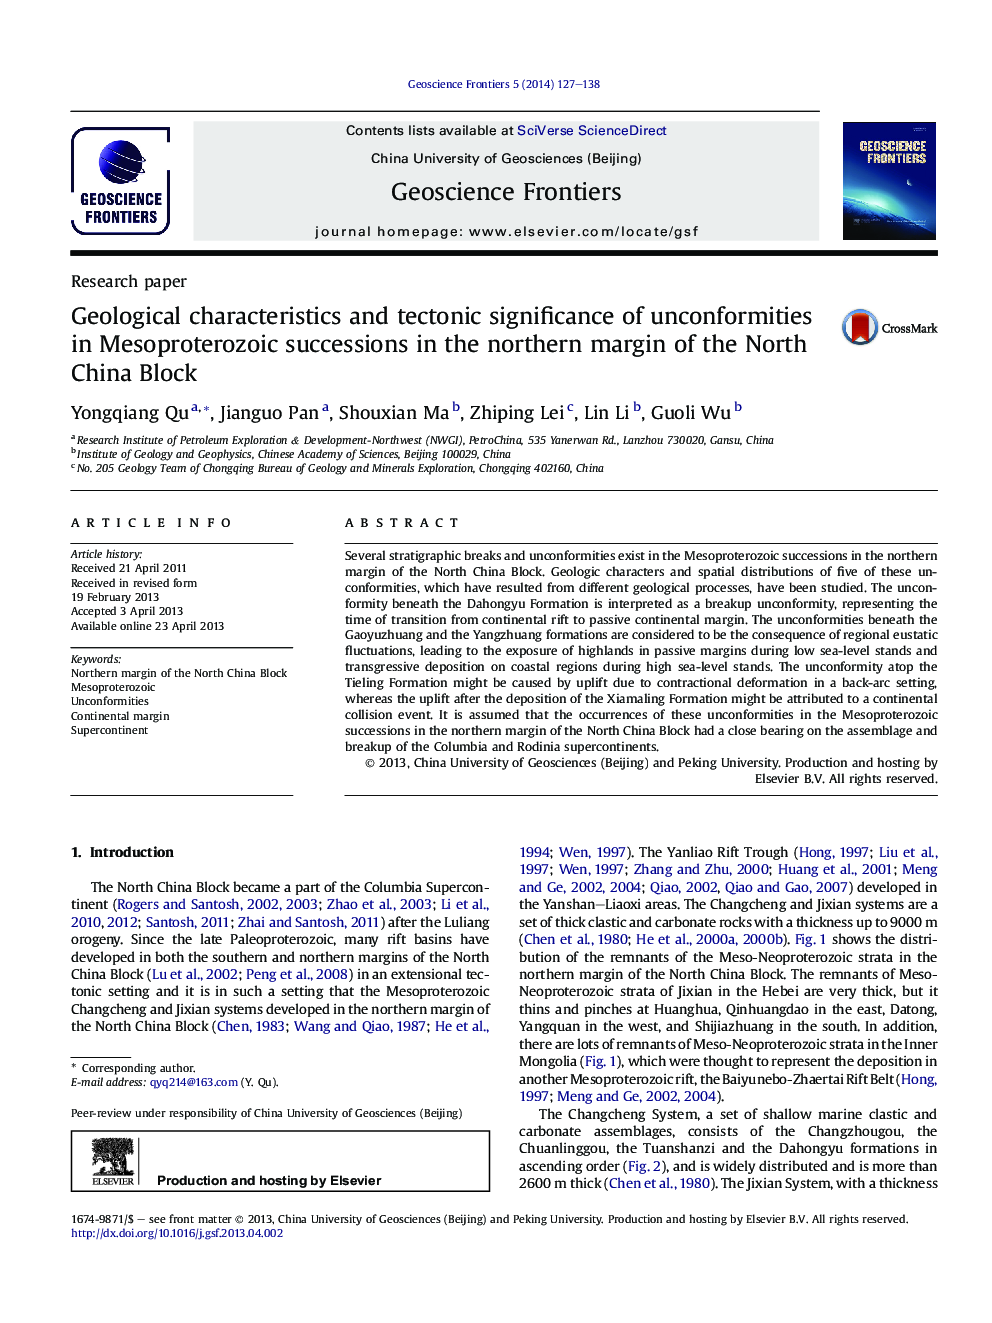 Geological characteristics and tectonic significance of unconformities in Mesoproterozoic successions in the northern margin of the North China Block 